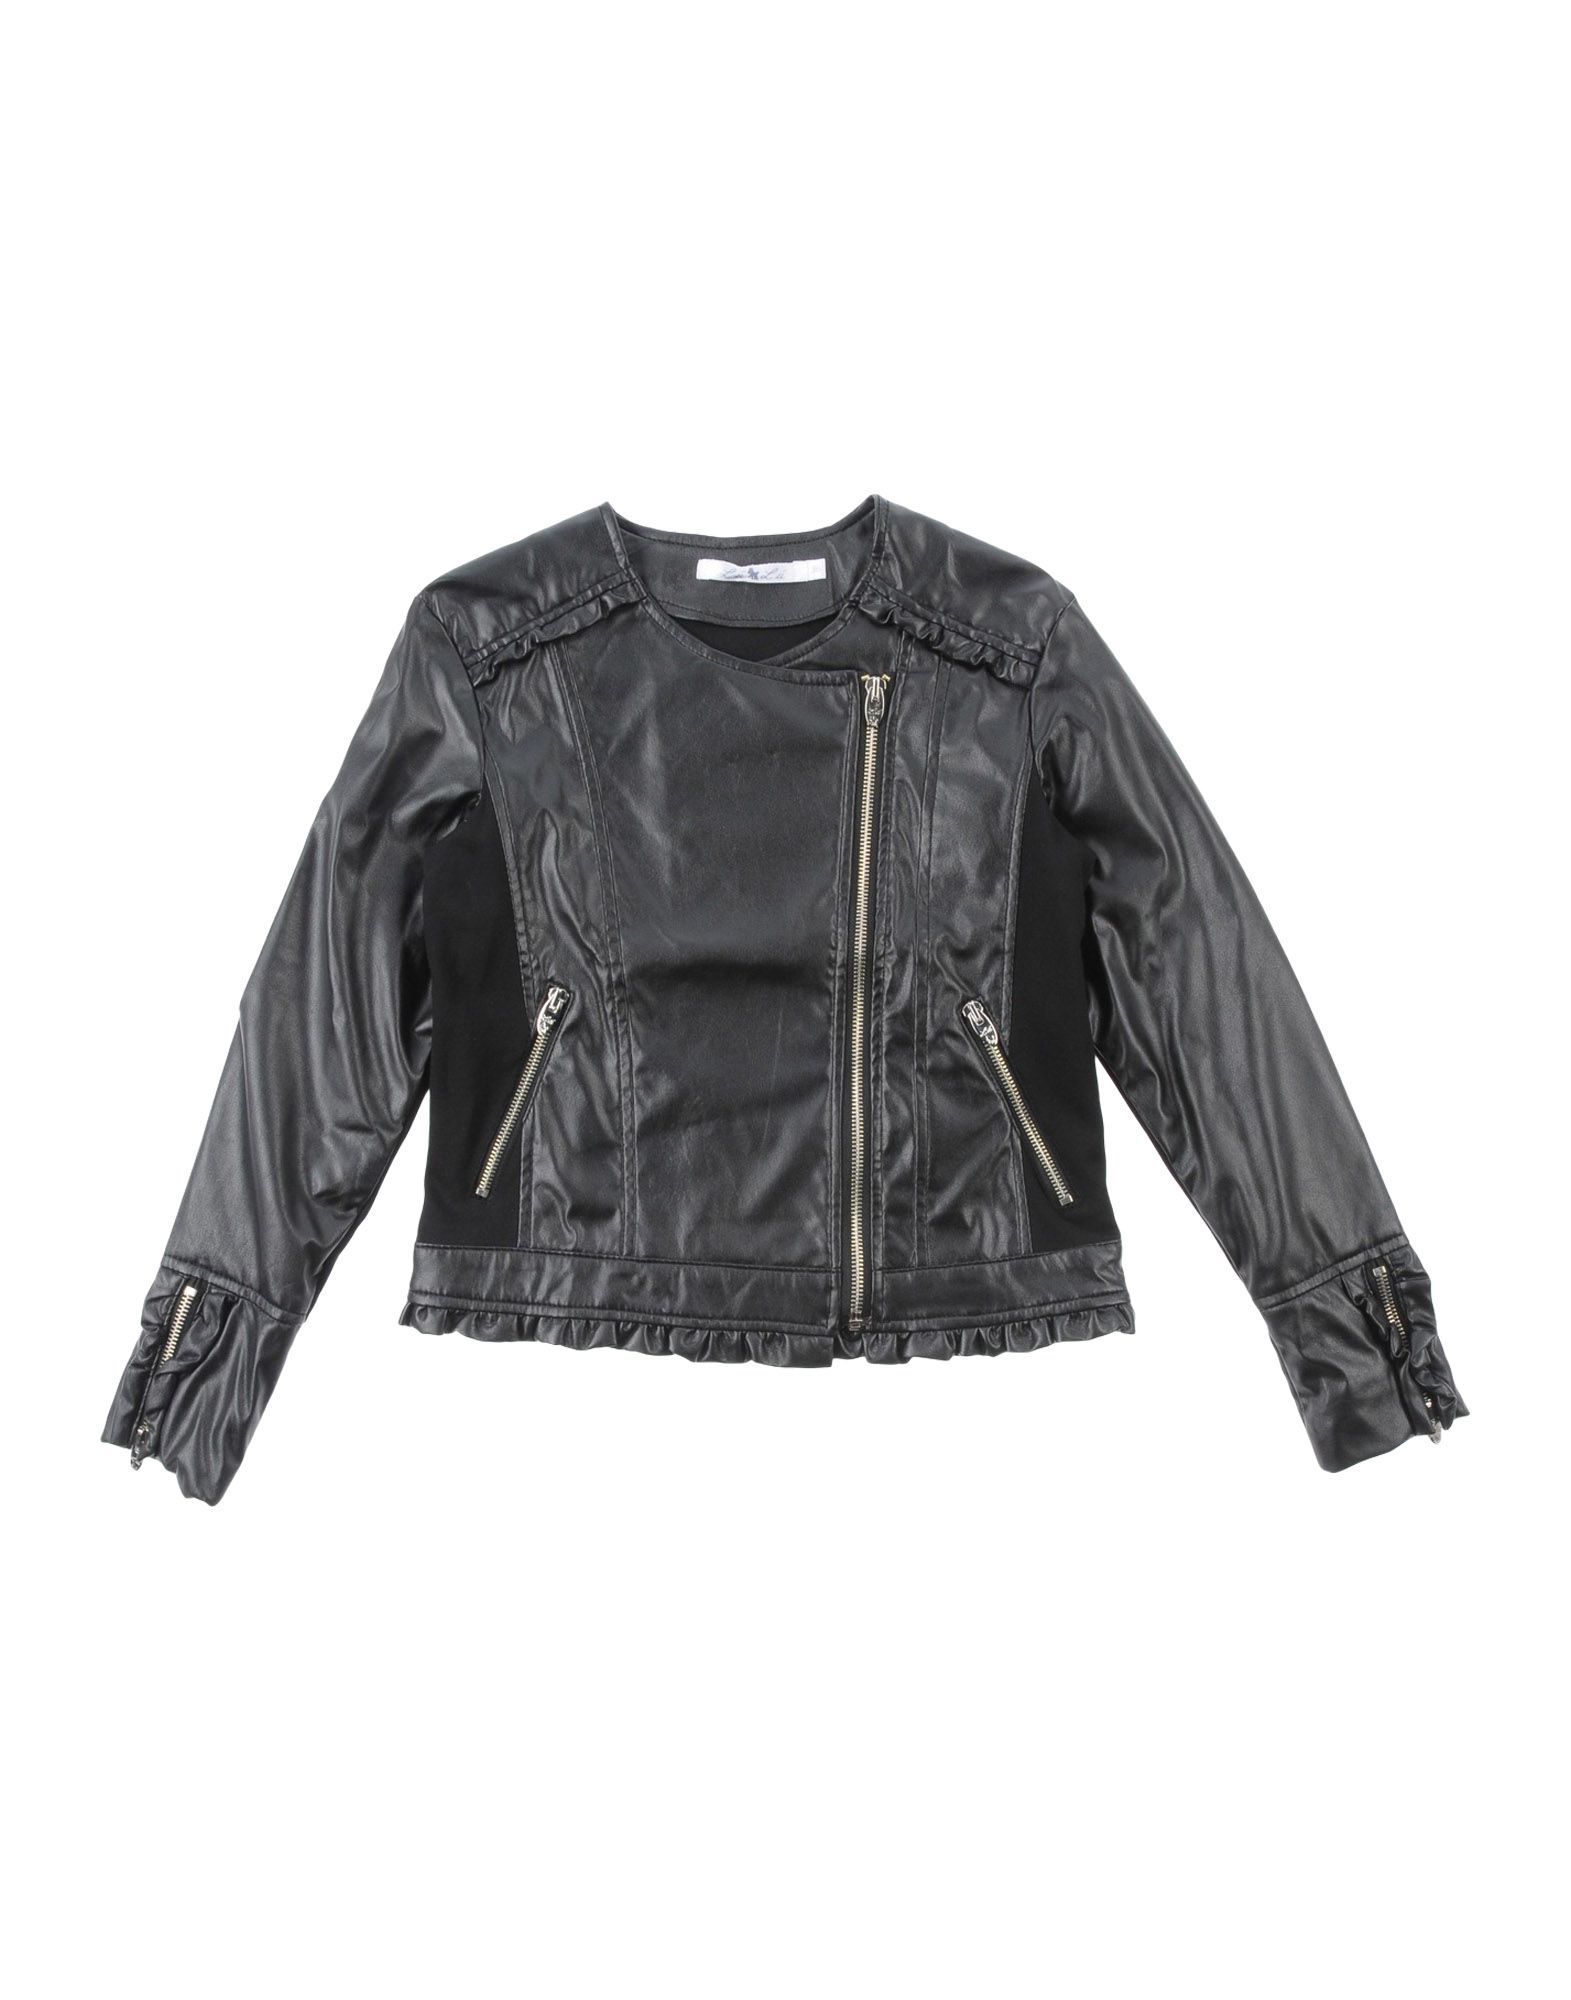 Faux leather<br>Jersey<br>No appliqu�s<br>Solid colour<br>Single-breasted <br>Zip<br>Round collar<br>Multipockets<br>Long sleeves<br>Zipped cuffs<br>Unlined<br>Hand-washing recommended<br>Do not dry clean<br>Iron at 110� c max<br>Do not bleach<br>Do not tumble dry<br>Generic outerwear<br>